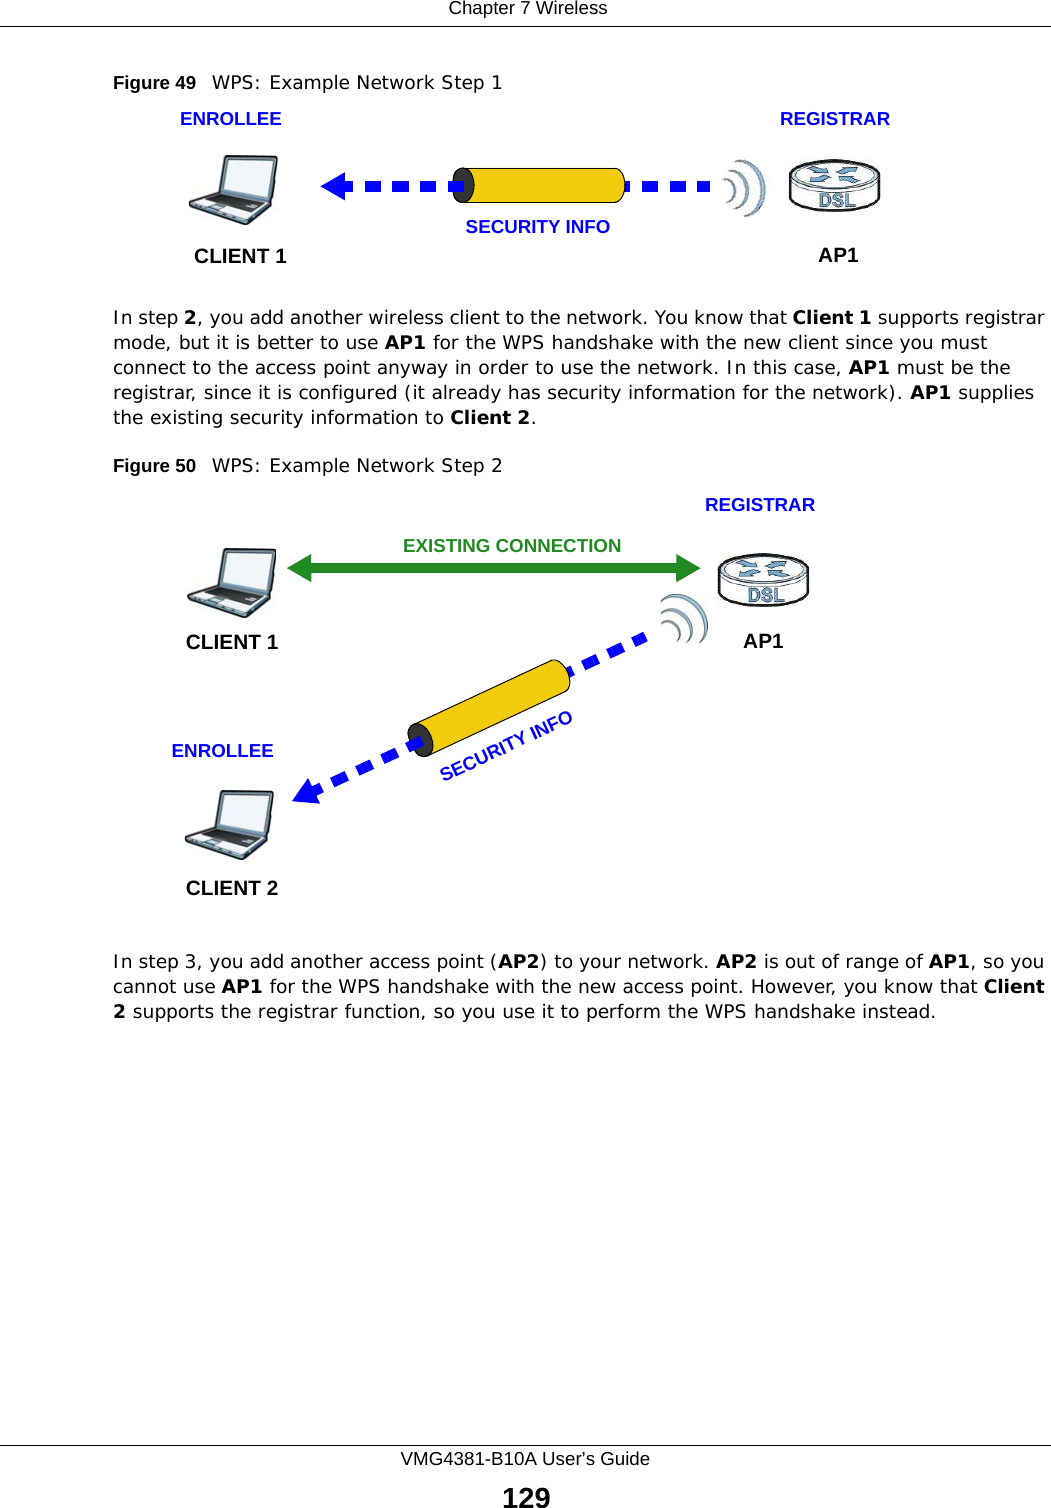  Chapter 7 WirelessVMG4381-B10A User’s Guide129Figure 49   WPS: Example Network Step 1In step 2, you add another wireless client to the network. You know that Client 1 supports registrar mode, but it is better to use AP1 for the WPS handshake with the new client since you must connect to the access point anyway in order to use the network. In this case, AP1 must be the registrar, since it is configured (it already has security information for the network). AP1 supplies the existing security information to Client 2.Figure 50   WPS: Example Network Step 2In step 3, you add another access point (AP2) to your network. AP2 is out of range of AP1, so you cannot use AP1 for the WPS handshake with the new access point. However, you know that Client 2 supports the registrar function, so you use it to perform the WPS handshake instead.REGISTRARENROLLEESECURITY INFOCLIENT 1 AP1REGISTRARCLIENT 1 AP1ENROLLEECLIENT 2EXISTING CONNECTIONSECURITY INFO